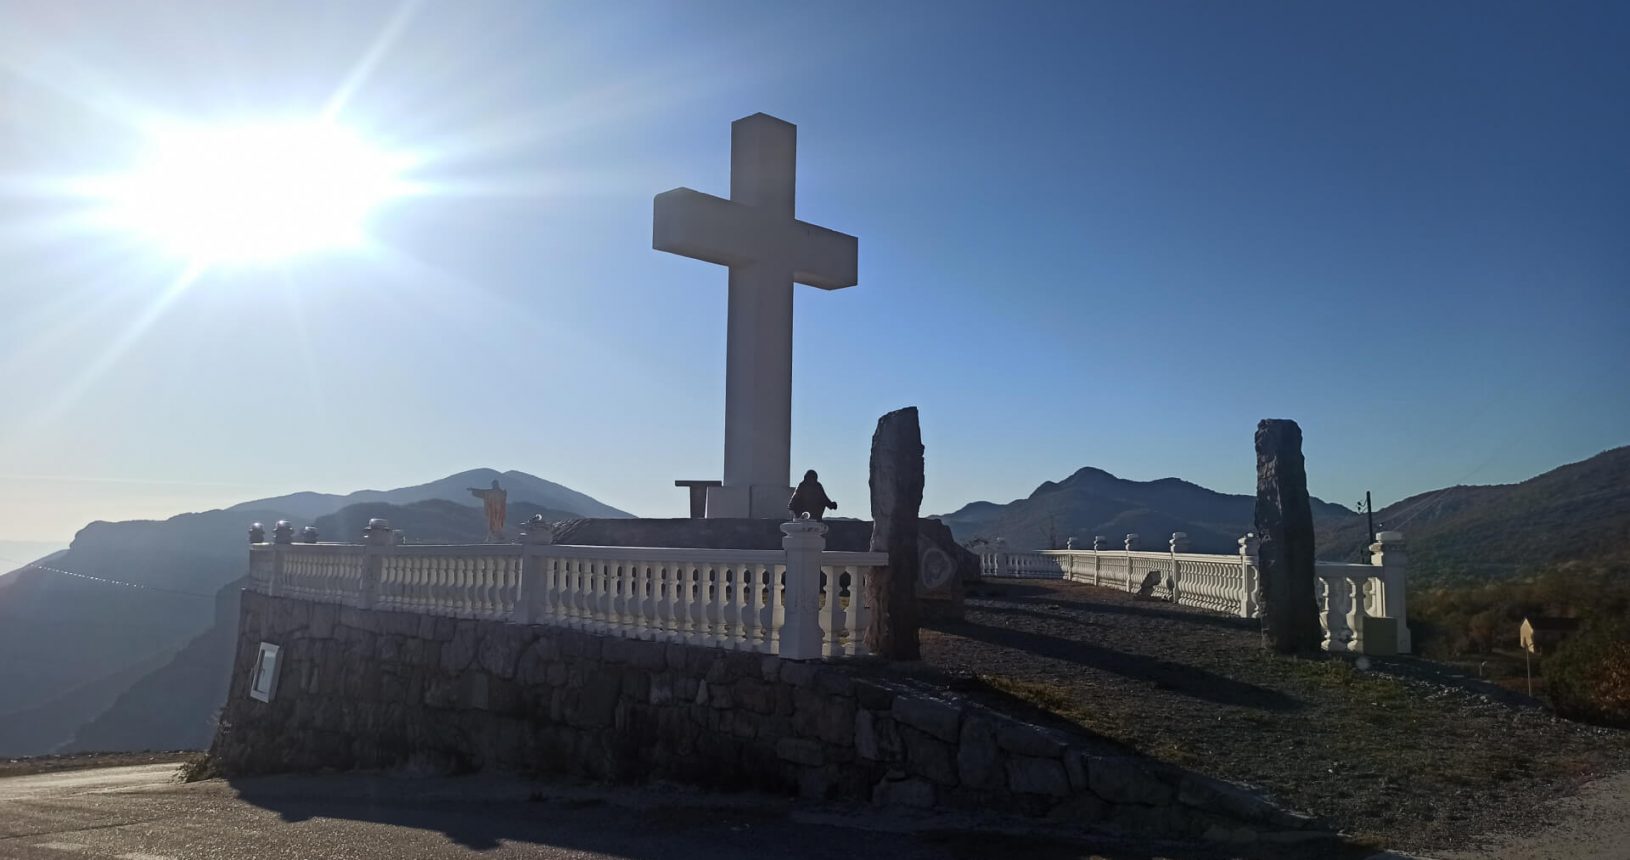 Highlighted with sun Viewpoint with big cross and Jesus